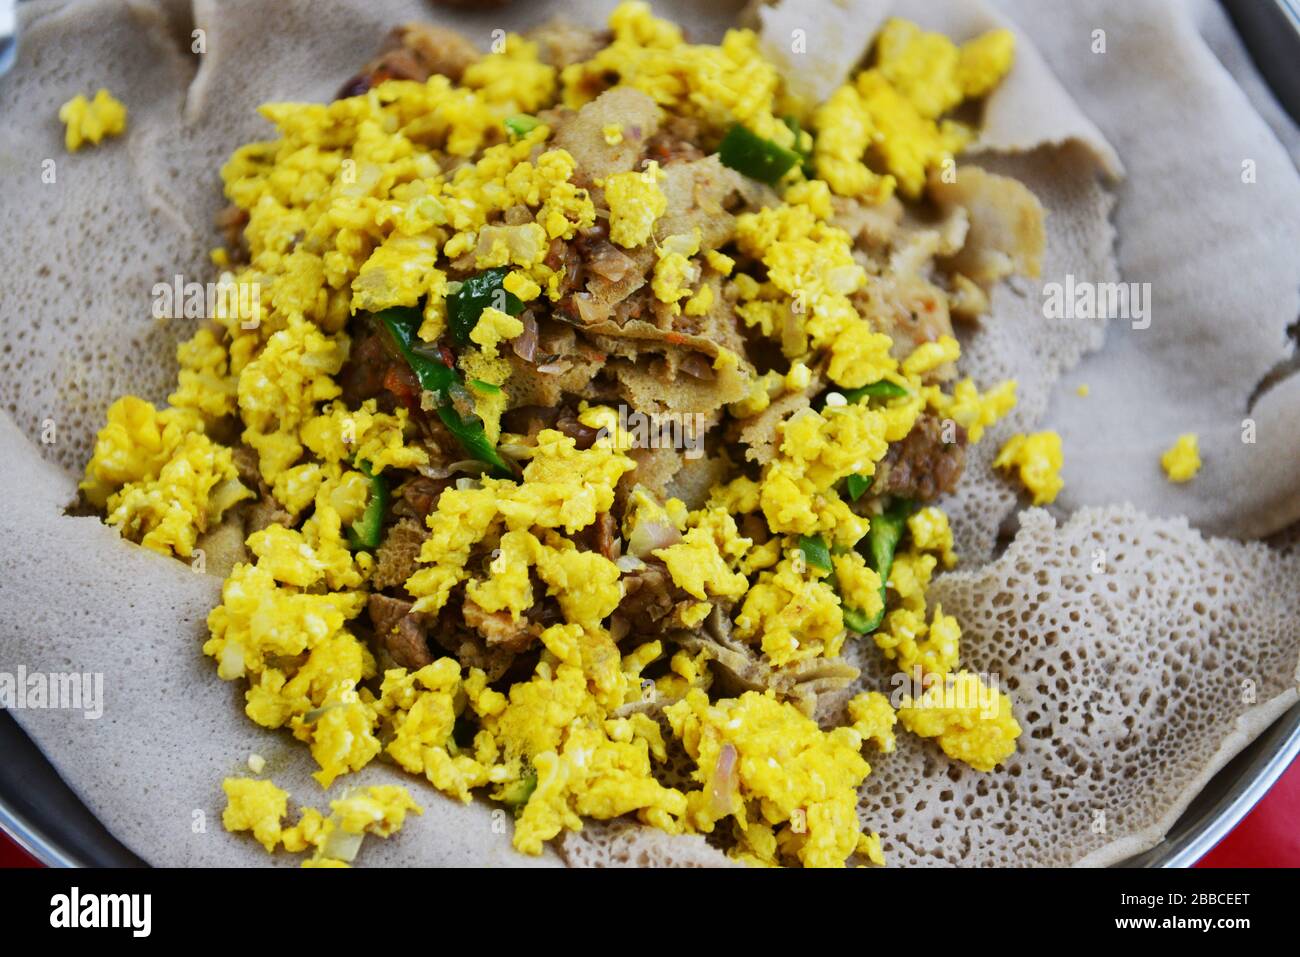 Firfir with scramble eggs is a popular breakfast in Ethiopia. Stock Photo